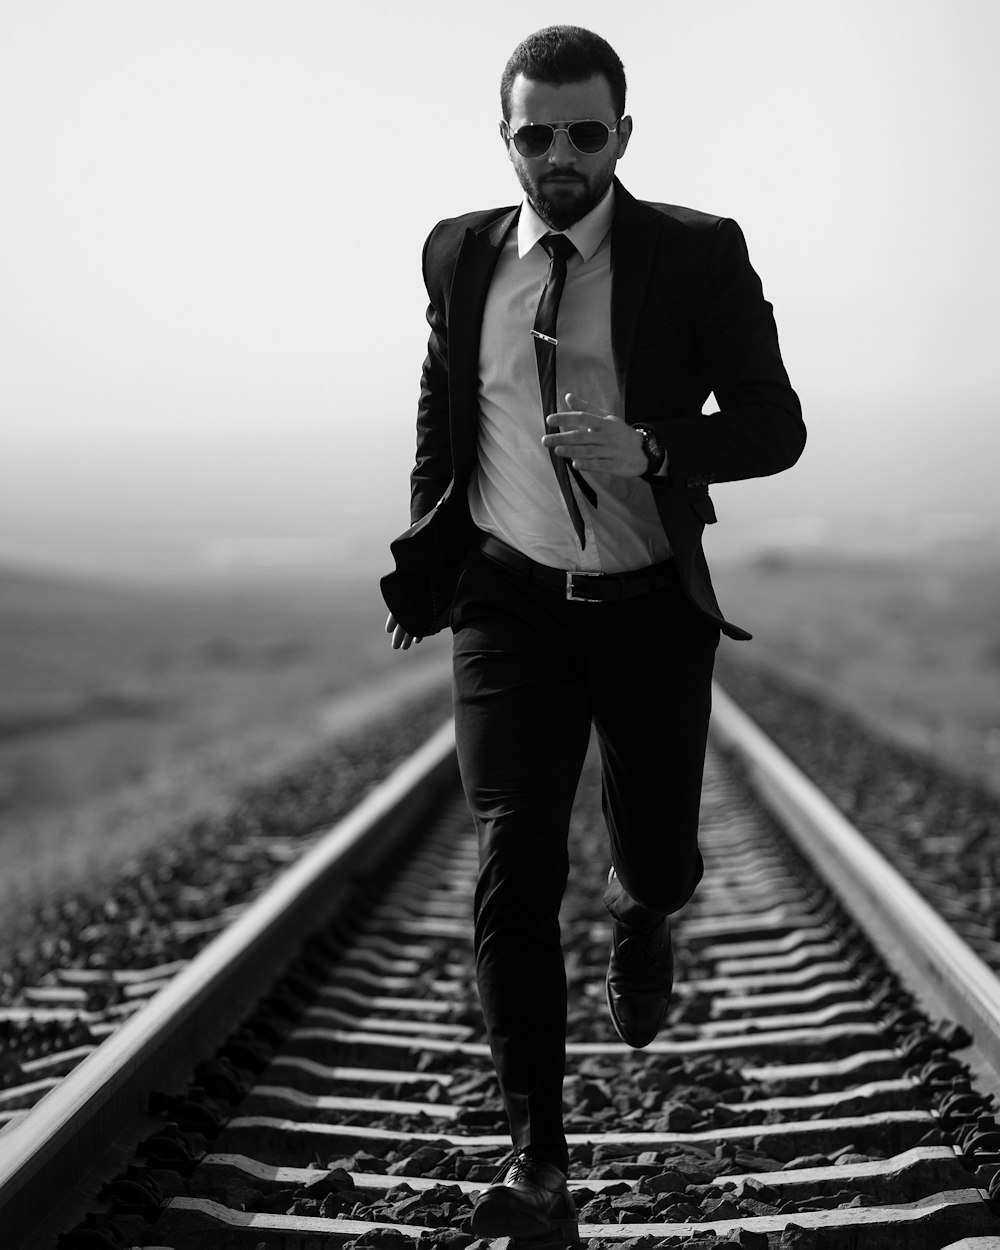 a man in a suit and tie running down a train track